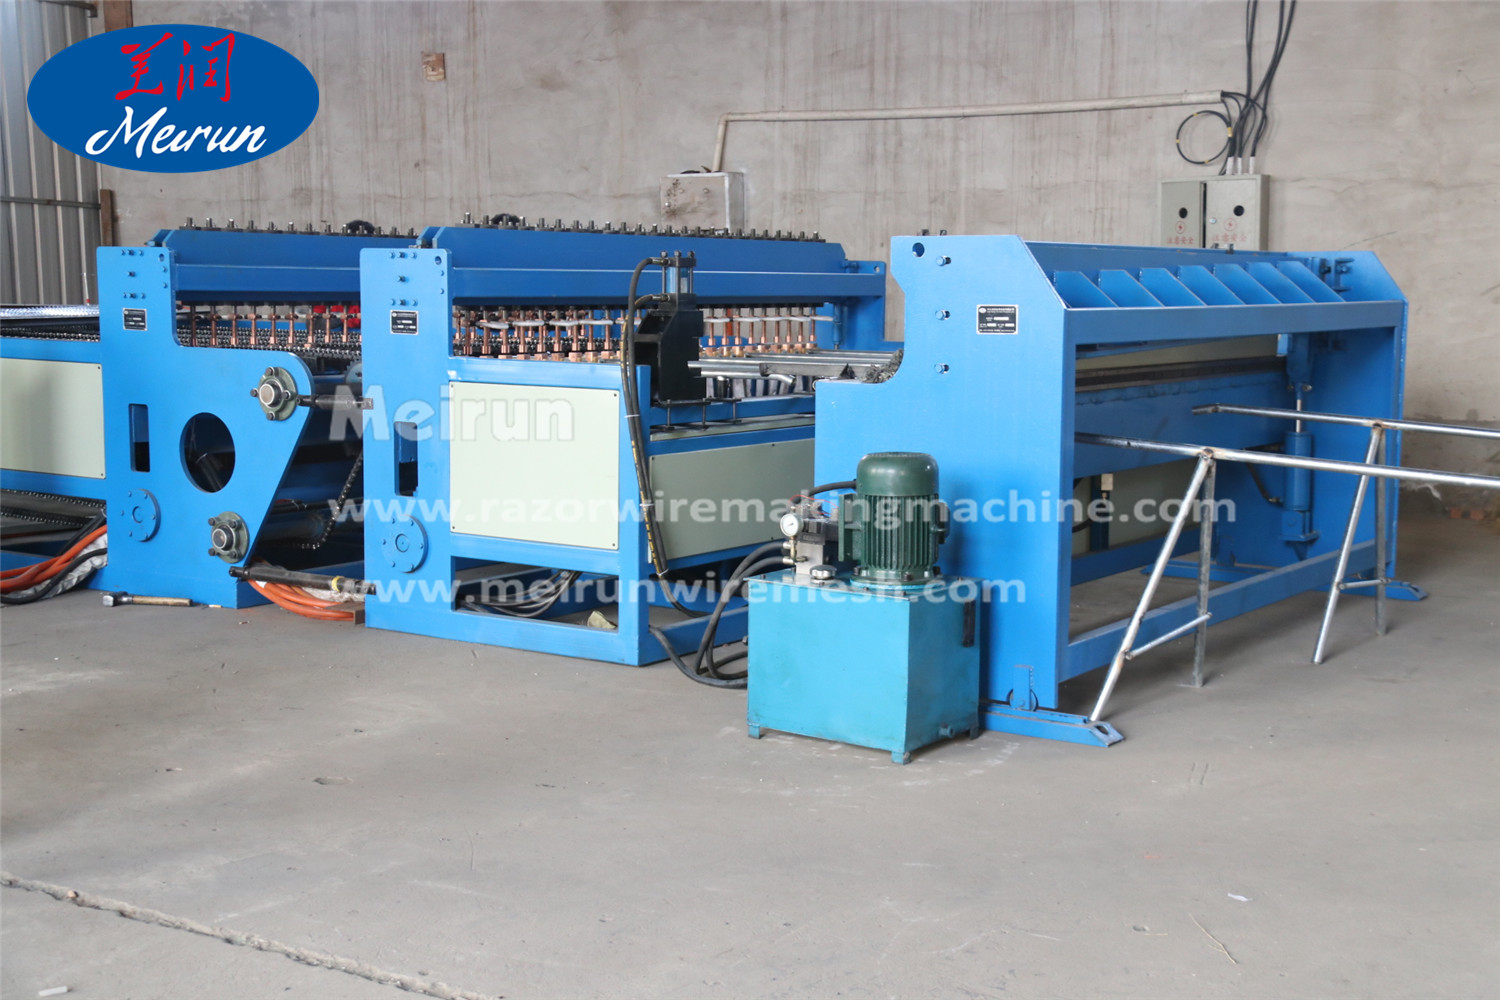 Full Automatic Wire Mesh Fence Mesh Welded Machines for Different Use